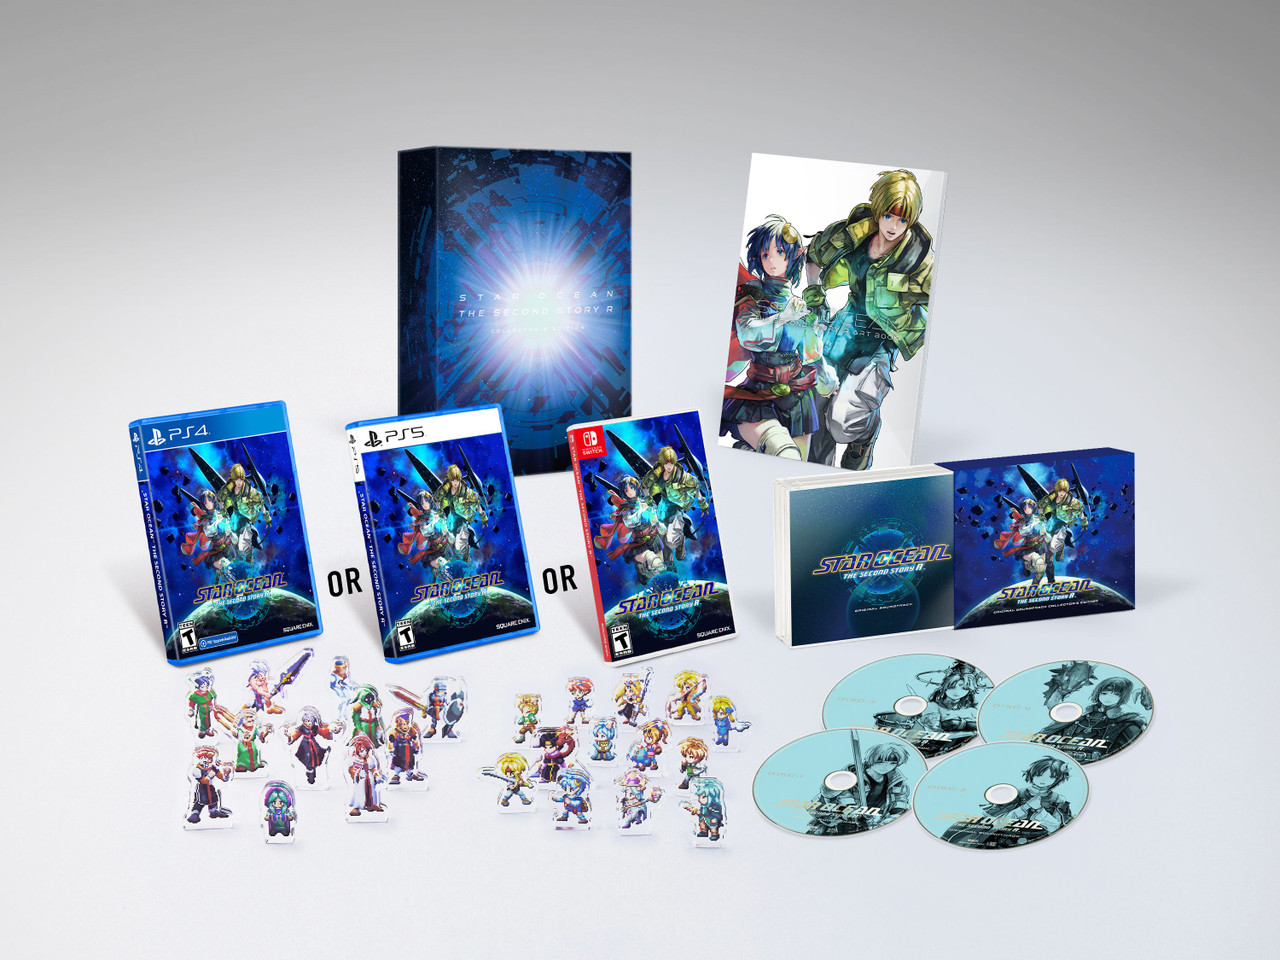 STAR OCEAN THE R SECOND STORY Store SQUARE ENIX 